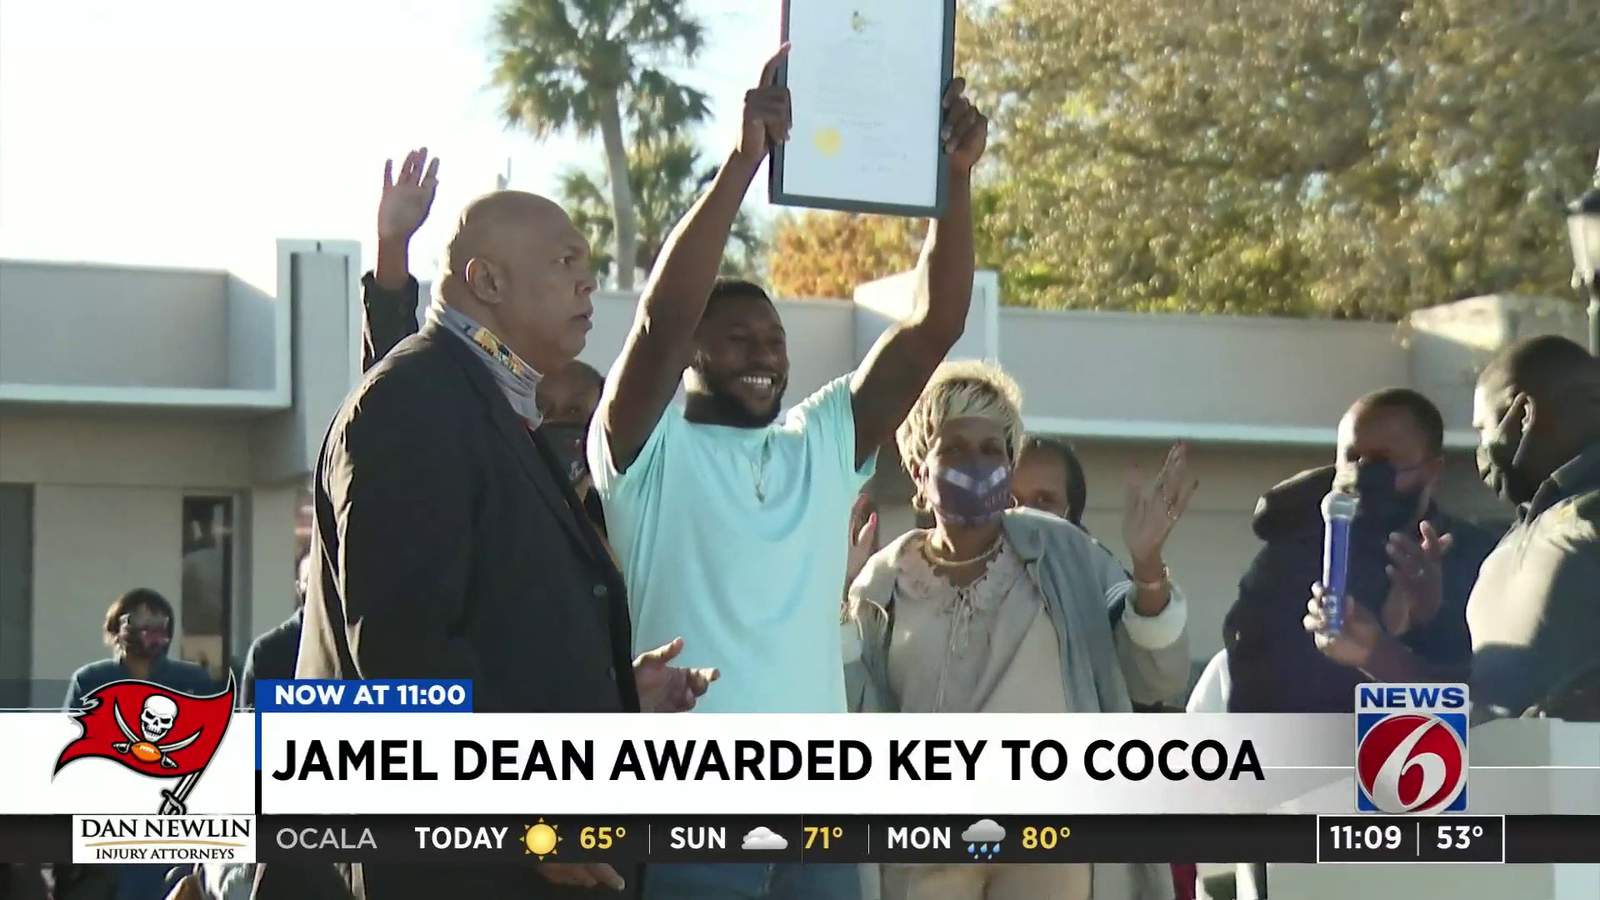 Cocoa honors Super Bowl champion Jamel Dean with key to city